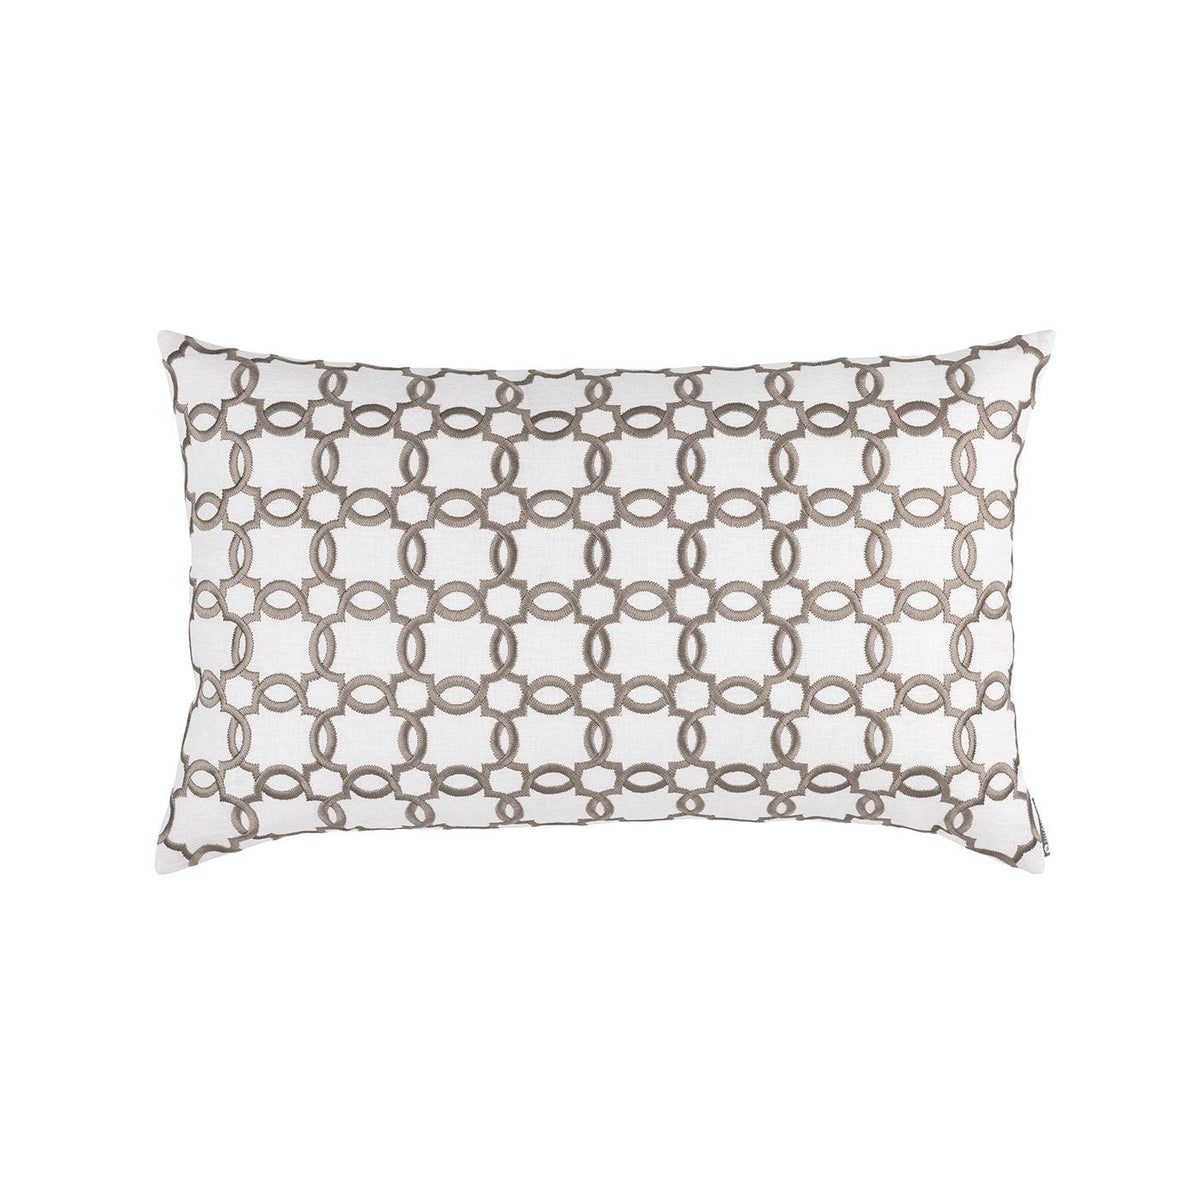 Lynx White &amp; Dark Sand Large Pillow by Lili Alessandra | Fig Linens 